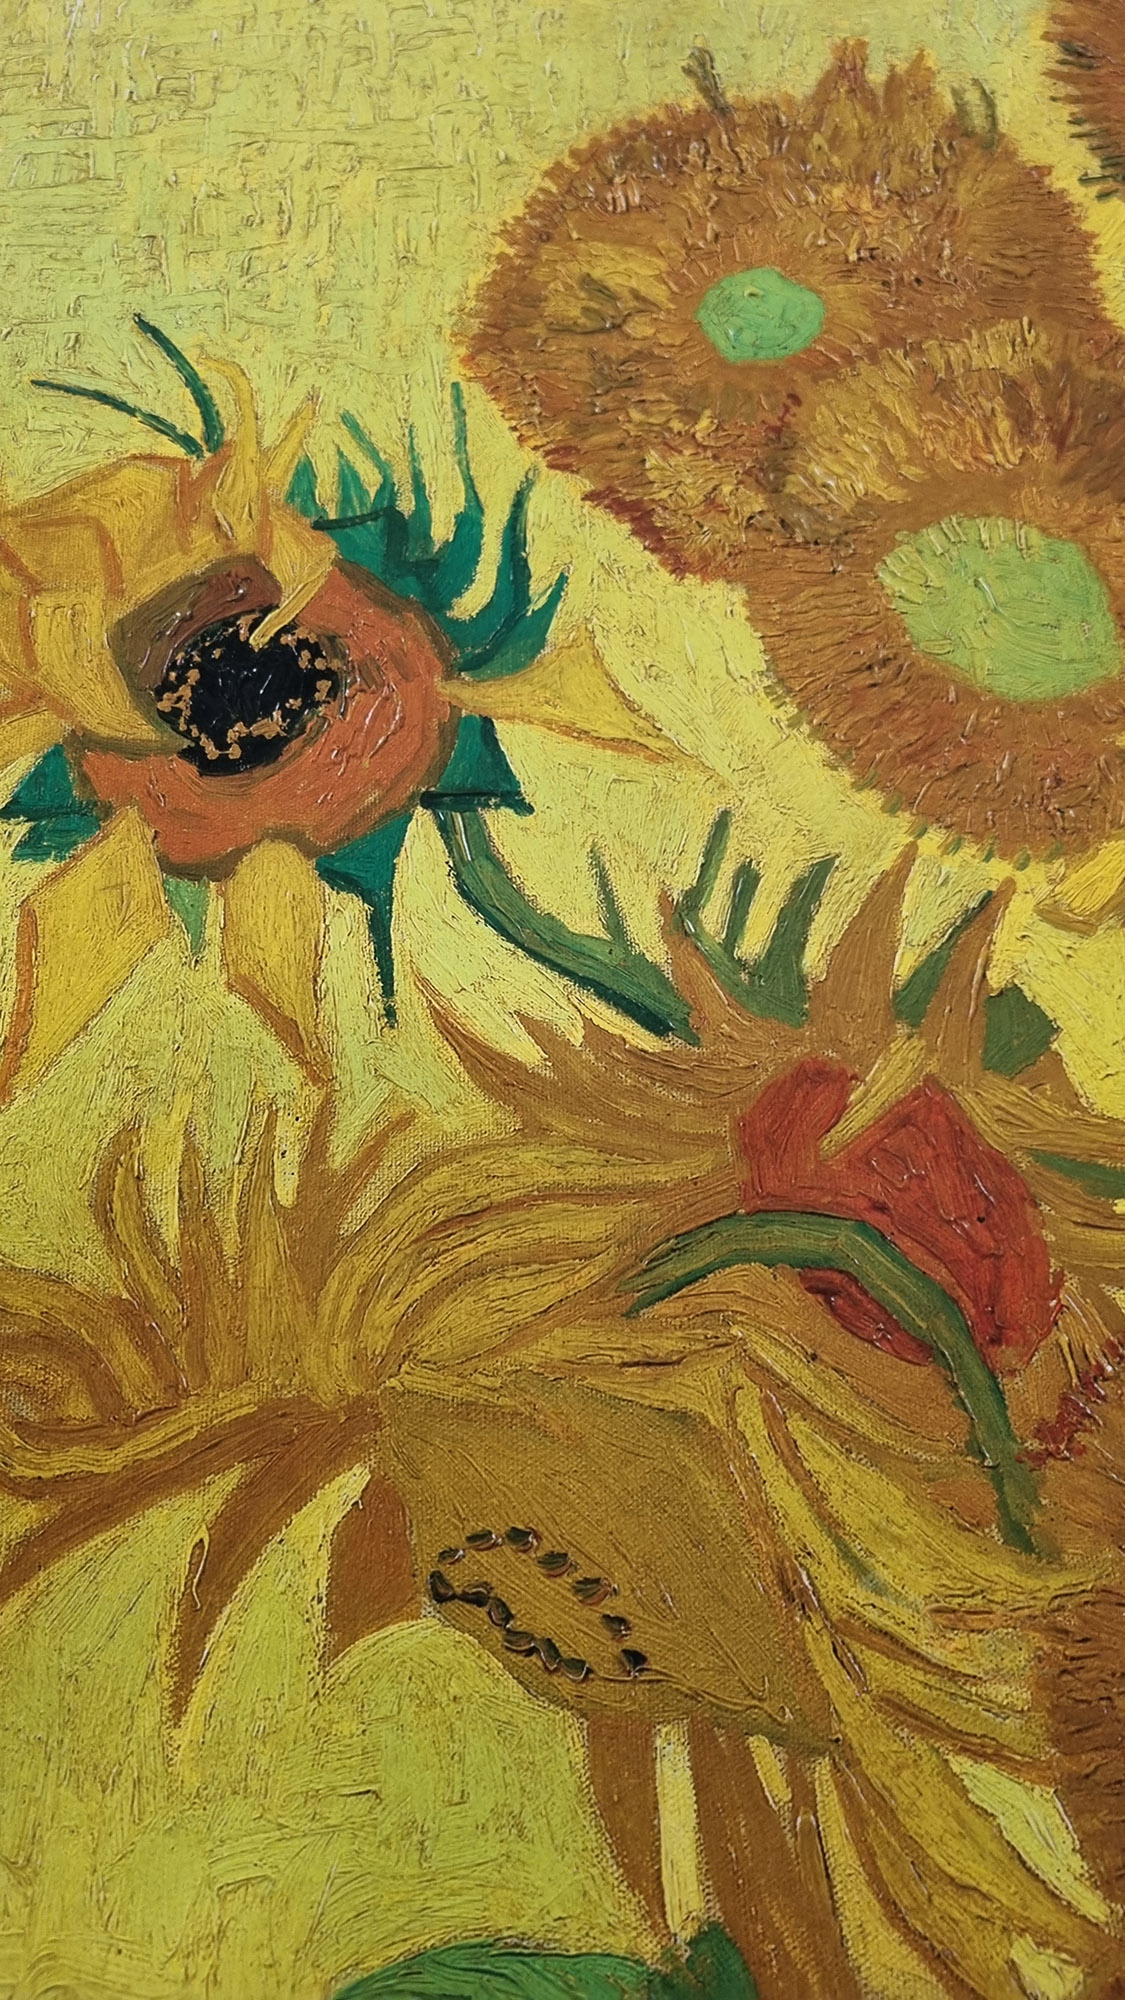 Rare Limited Edition Vincent Van Gogh ""Sunflowers"" One of only 75 Published. - Image 5 of 8